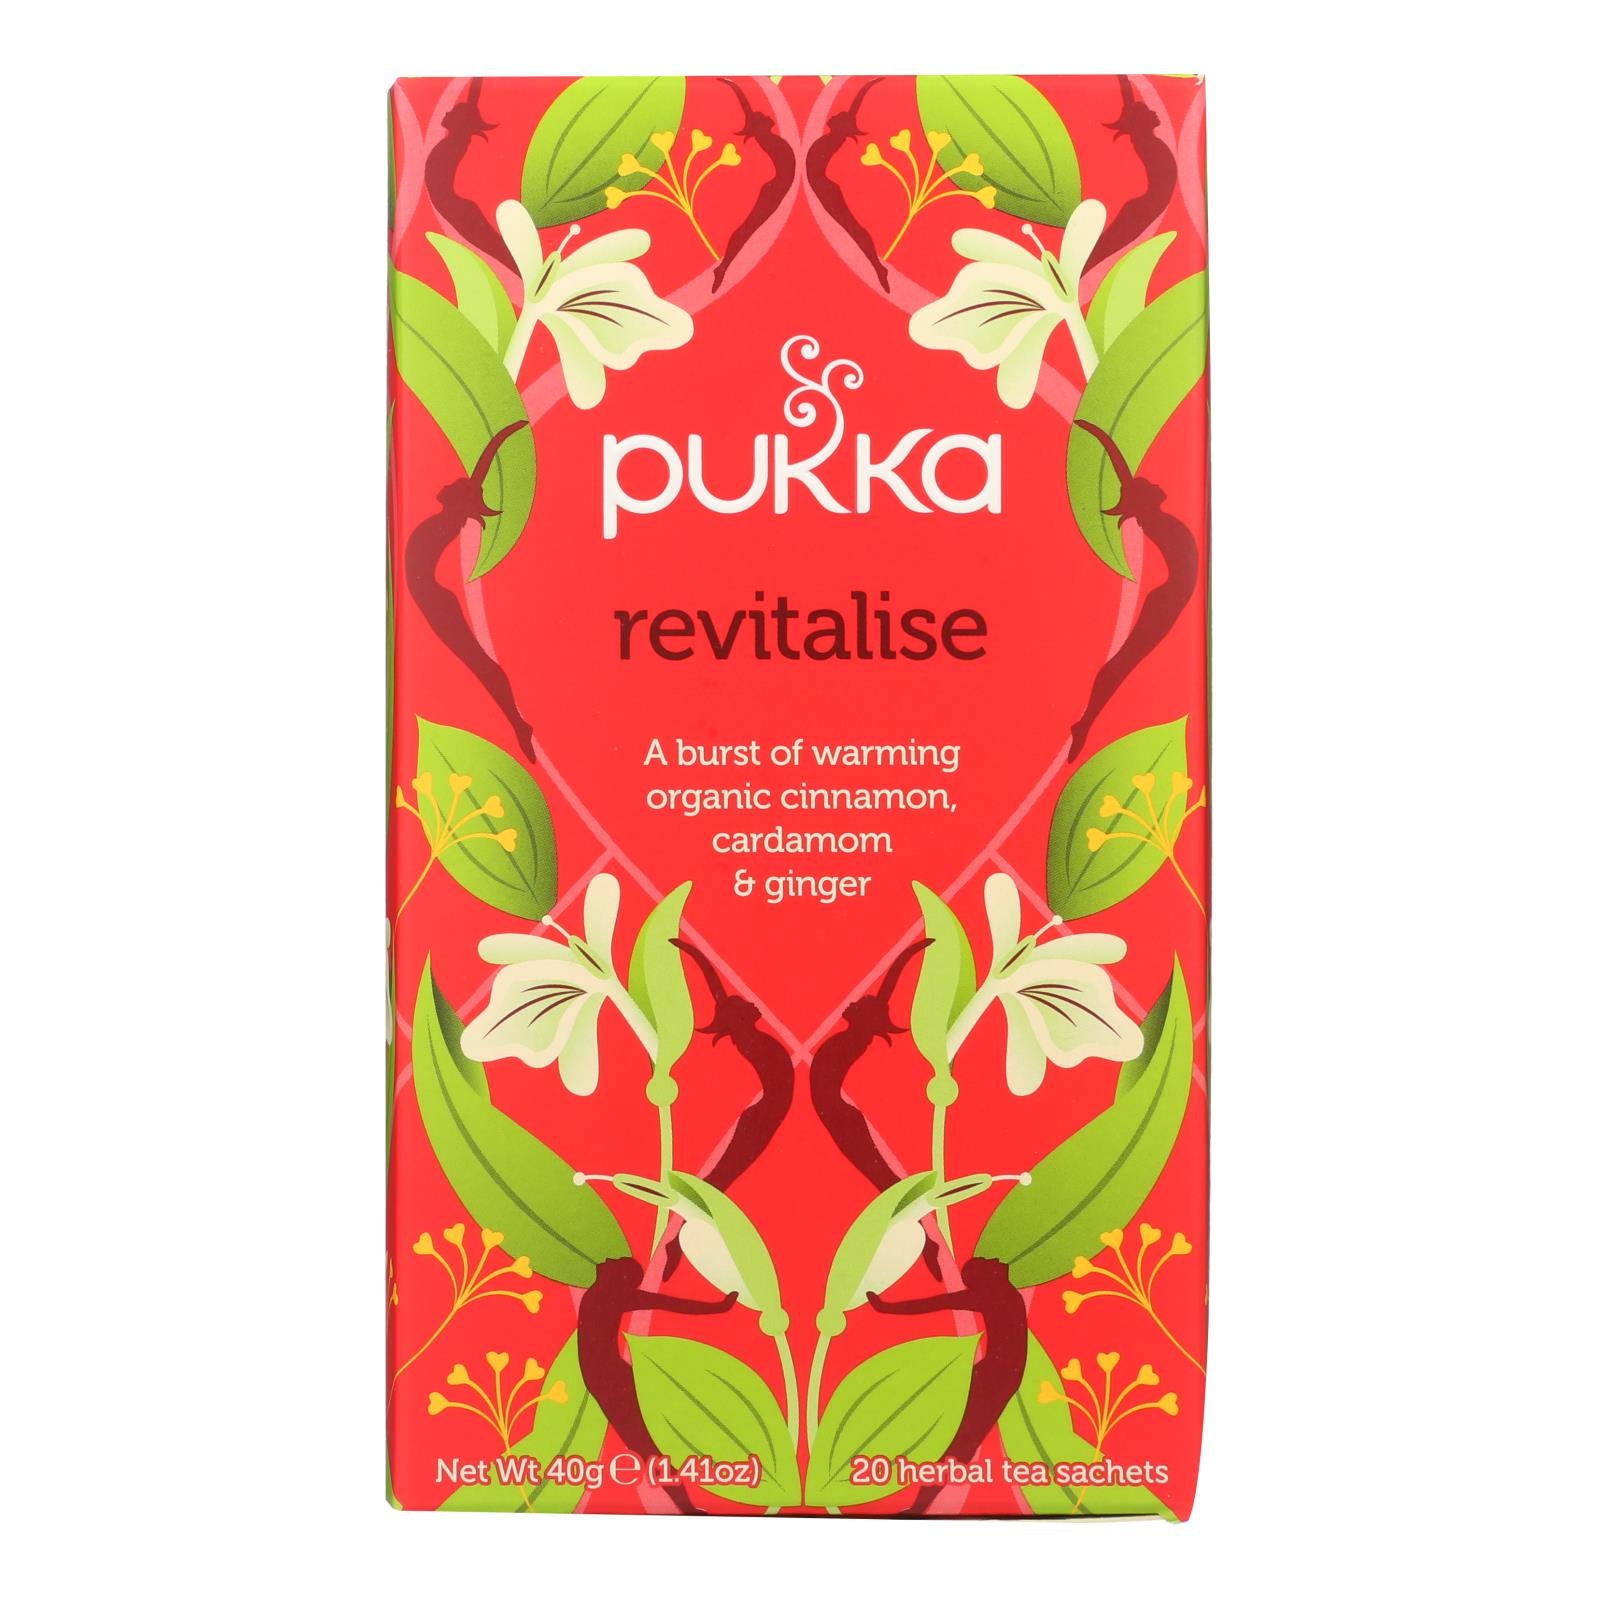 Pukka Herbal Tea Revitalize Organic  - Case of 6 - 20 Bags (120 Count) - Whole Green Foods